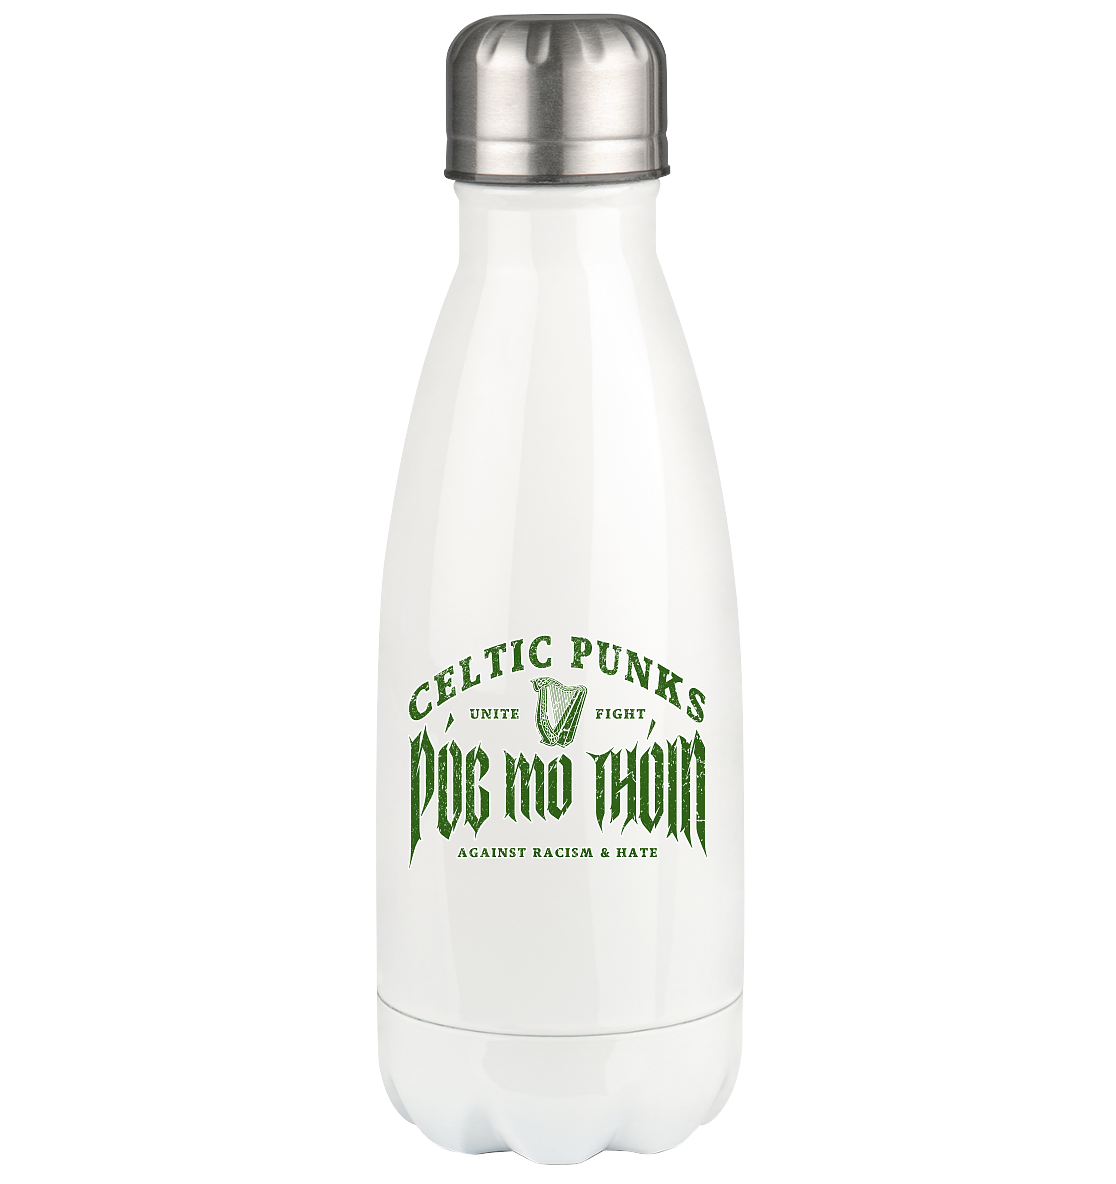 Póg Mo Thóin Streetwear "Celtic Punks Against Racism & Hate / Unite & Fight" - Thermoflasche 350ml